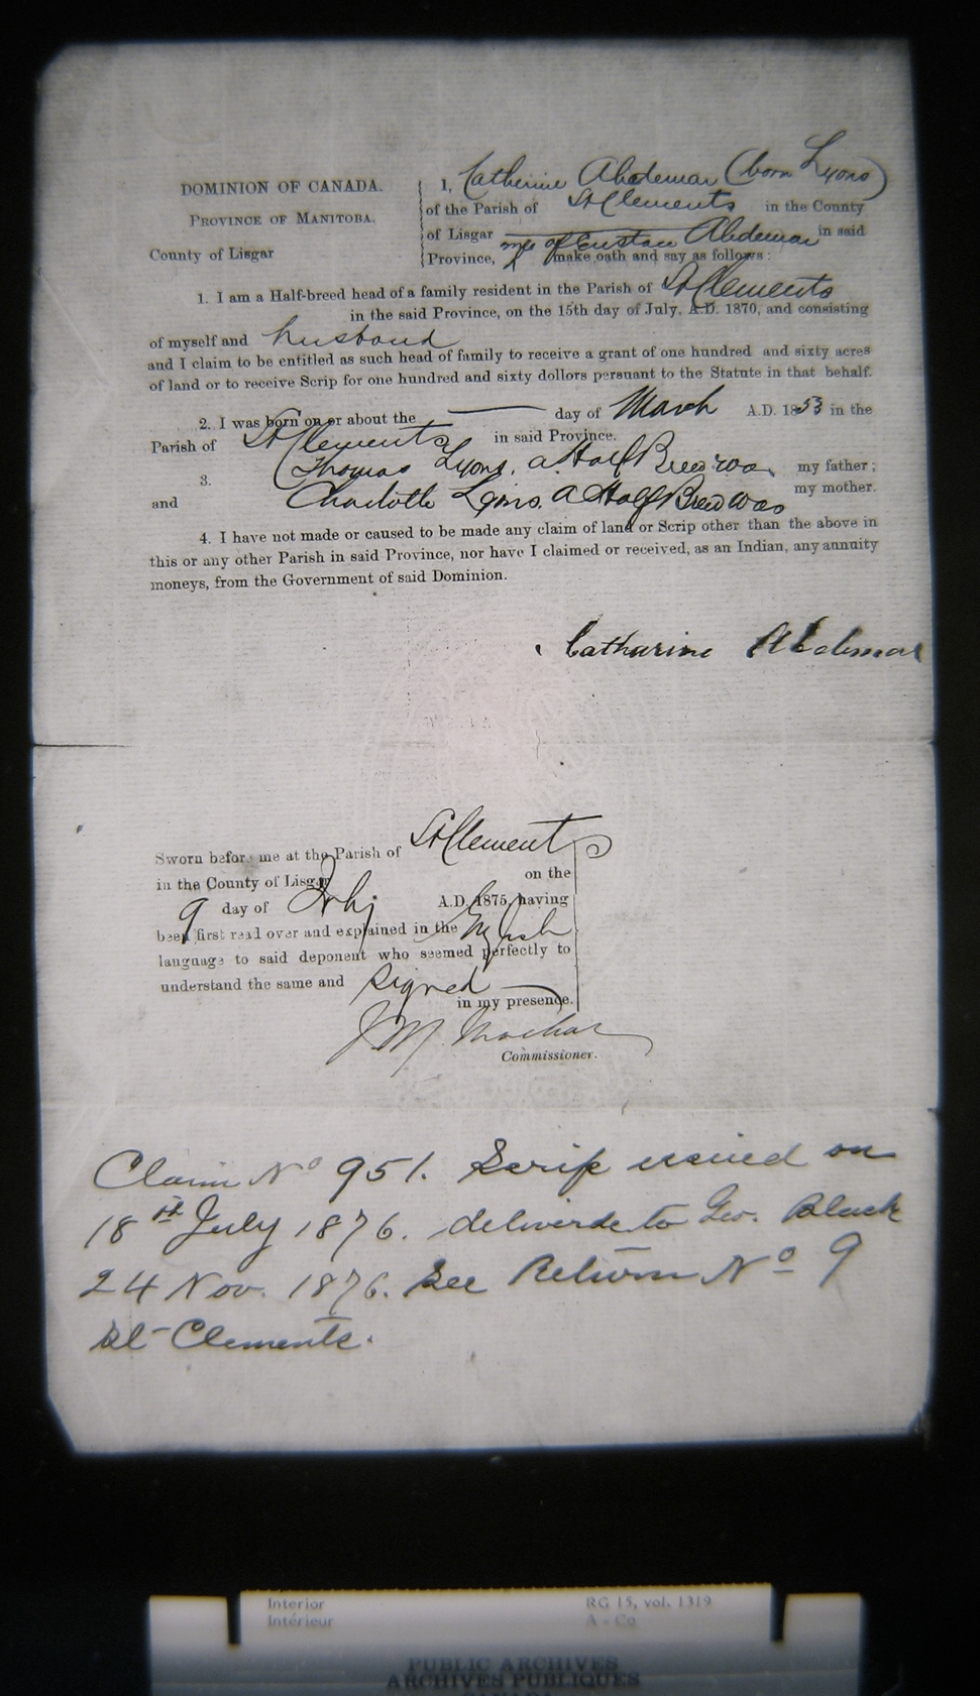 Declaration of Catherine Abdemar, head-of-family (digitized image after enhancement)